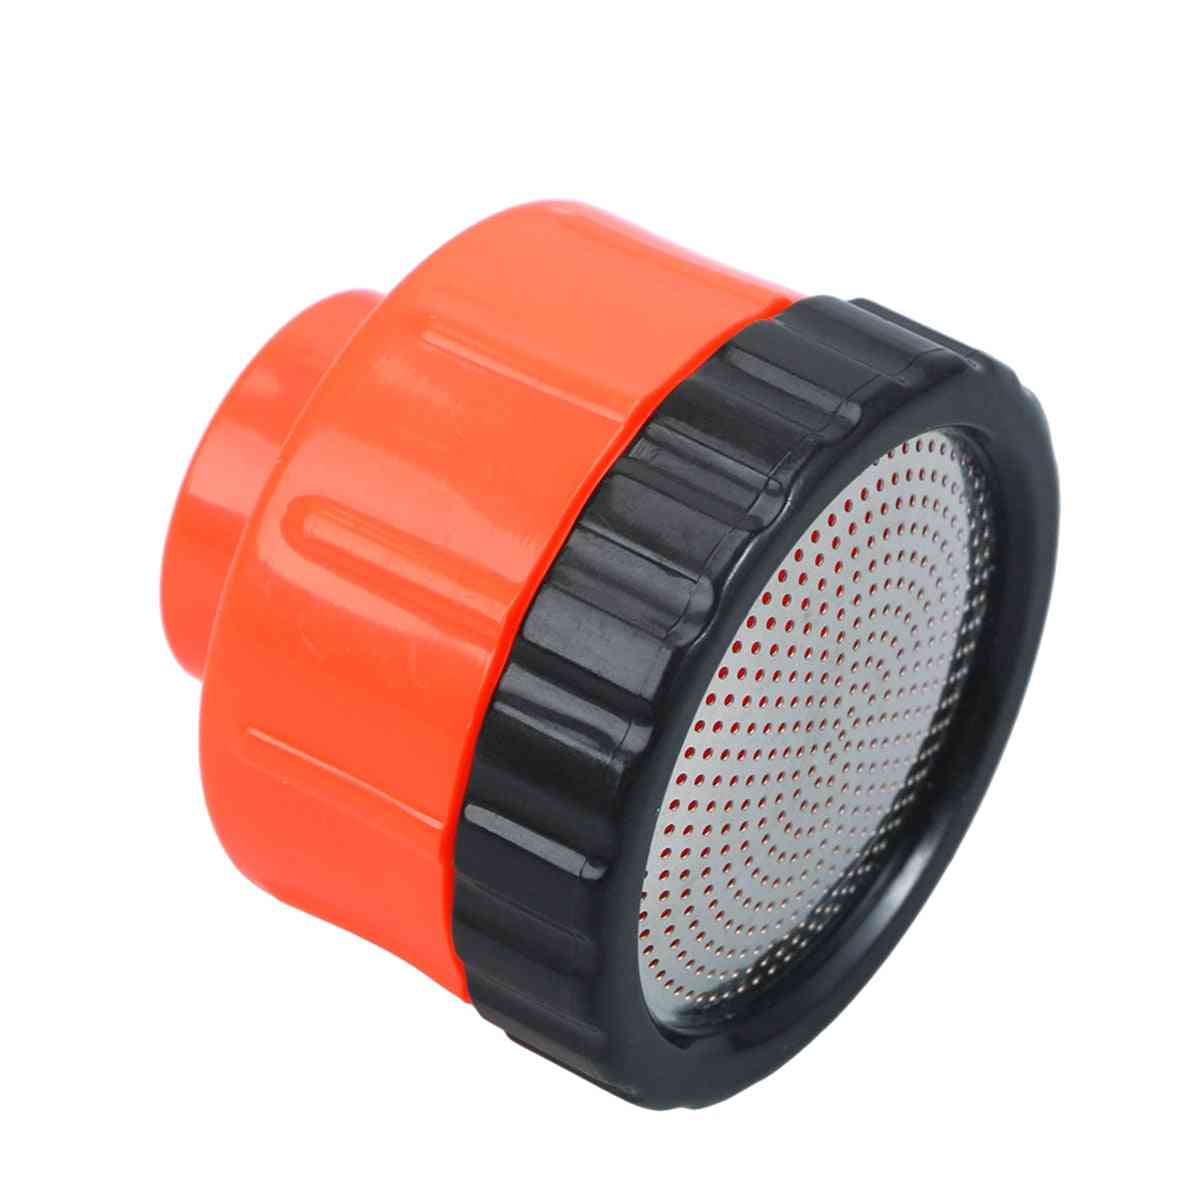 Plastic Water Breaker Nozzle With 400 Tiny Holes And Stainless Steel Disc